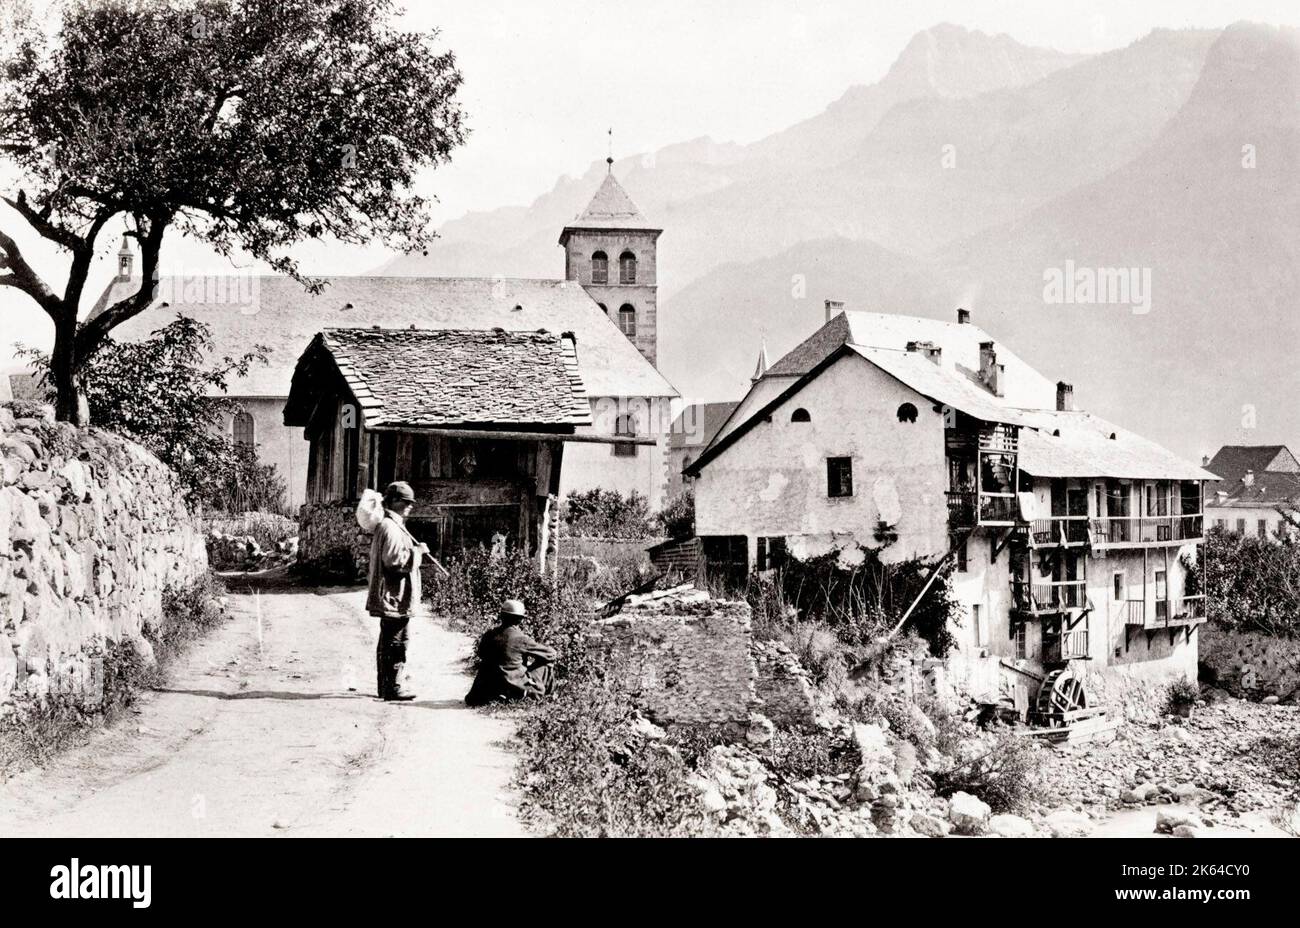 19th century vintage photograph: Sallanches is a commune in the Haute-Savoie department of France. Located close to the Mont Blanc massif, c.1880. Stock Photo